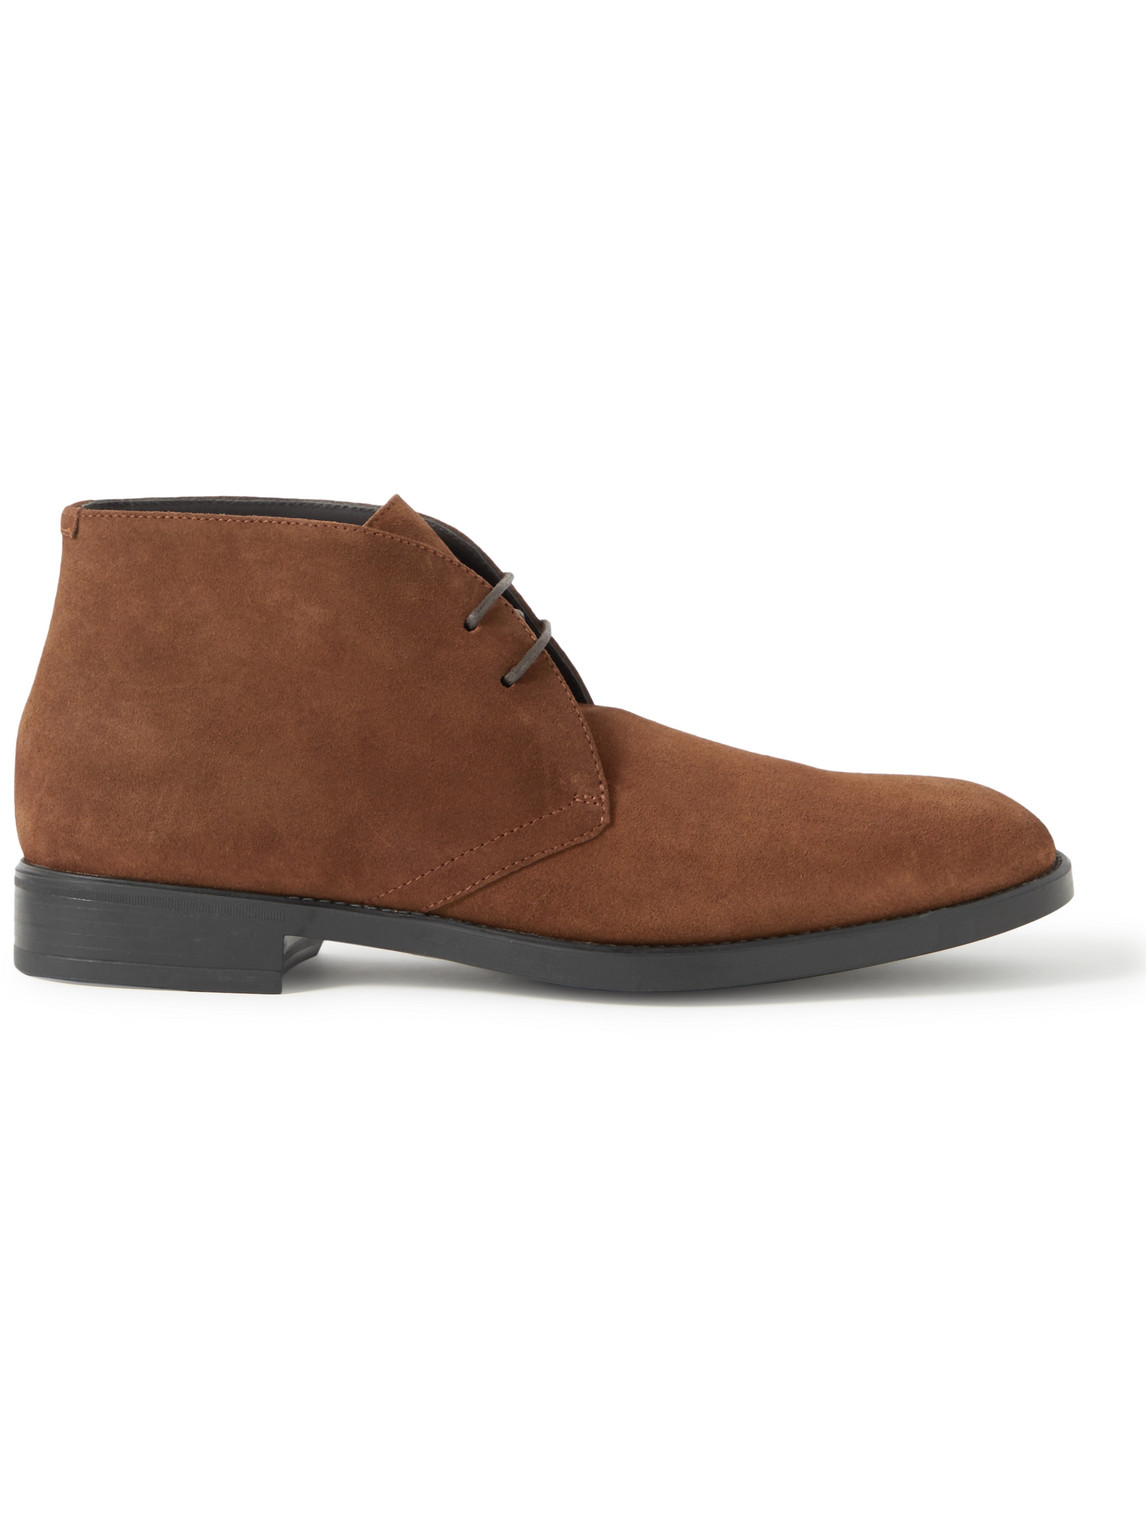 Tom Ford Robert Suede Chukka Boots In Brown